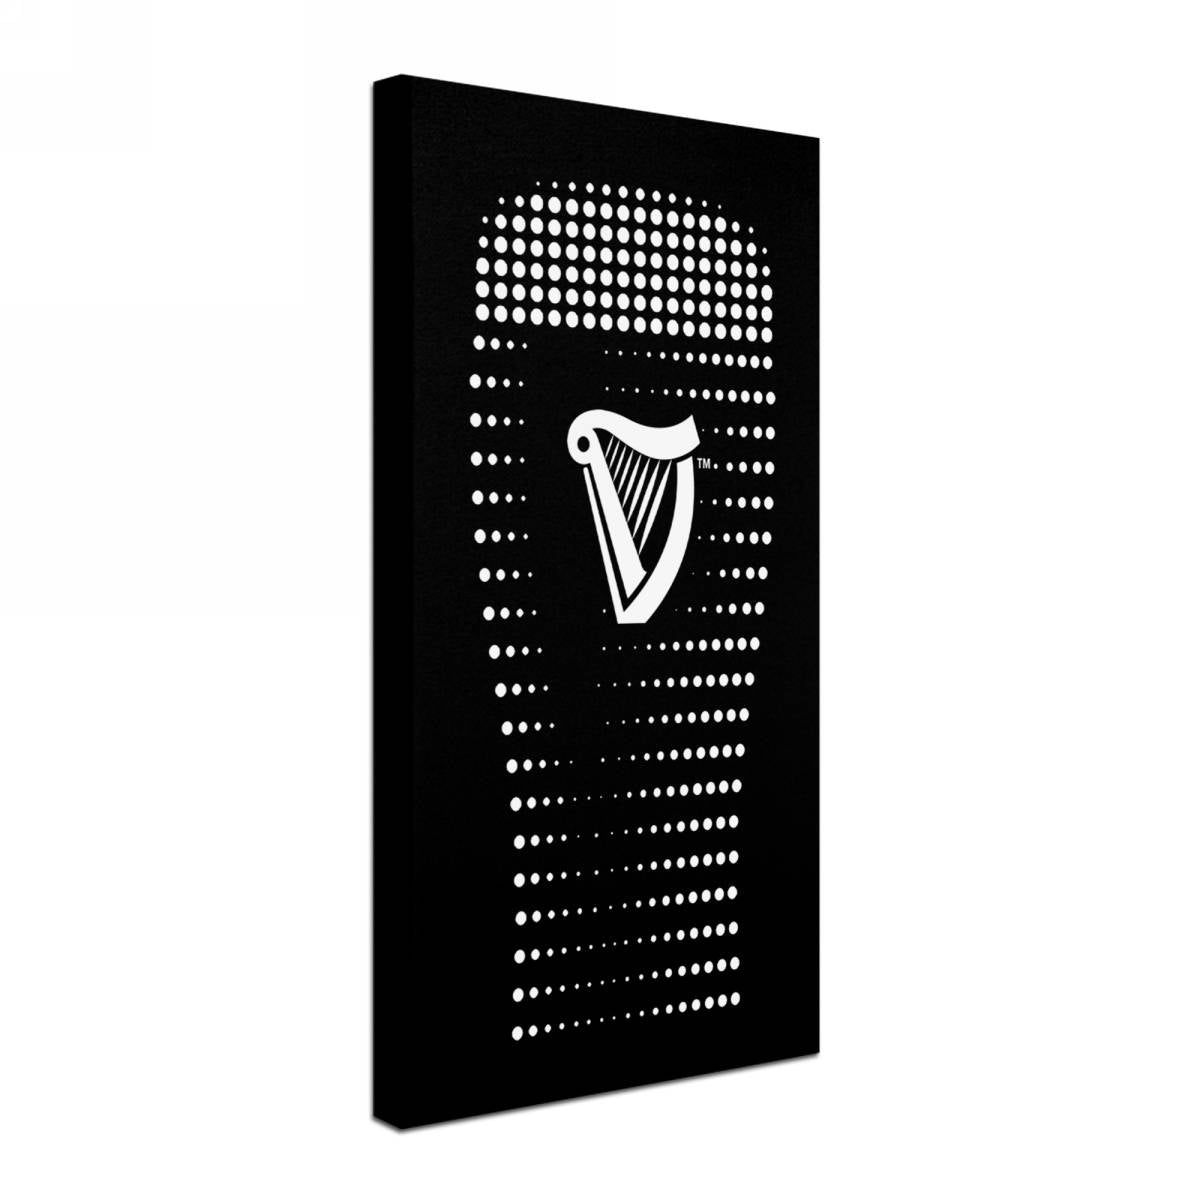 A Guinness-themed black canvas 'Guinness Brewery 'Guinness VIII' Canvas Art' with a harp on it.